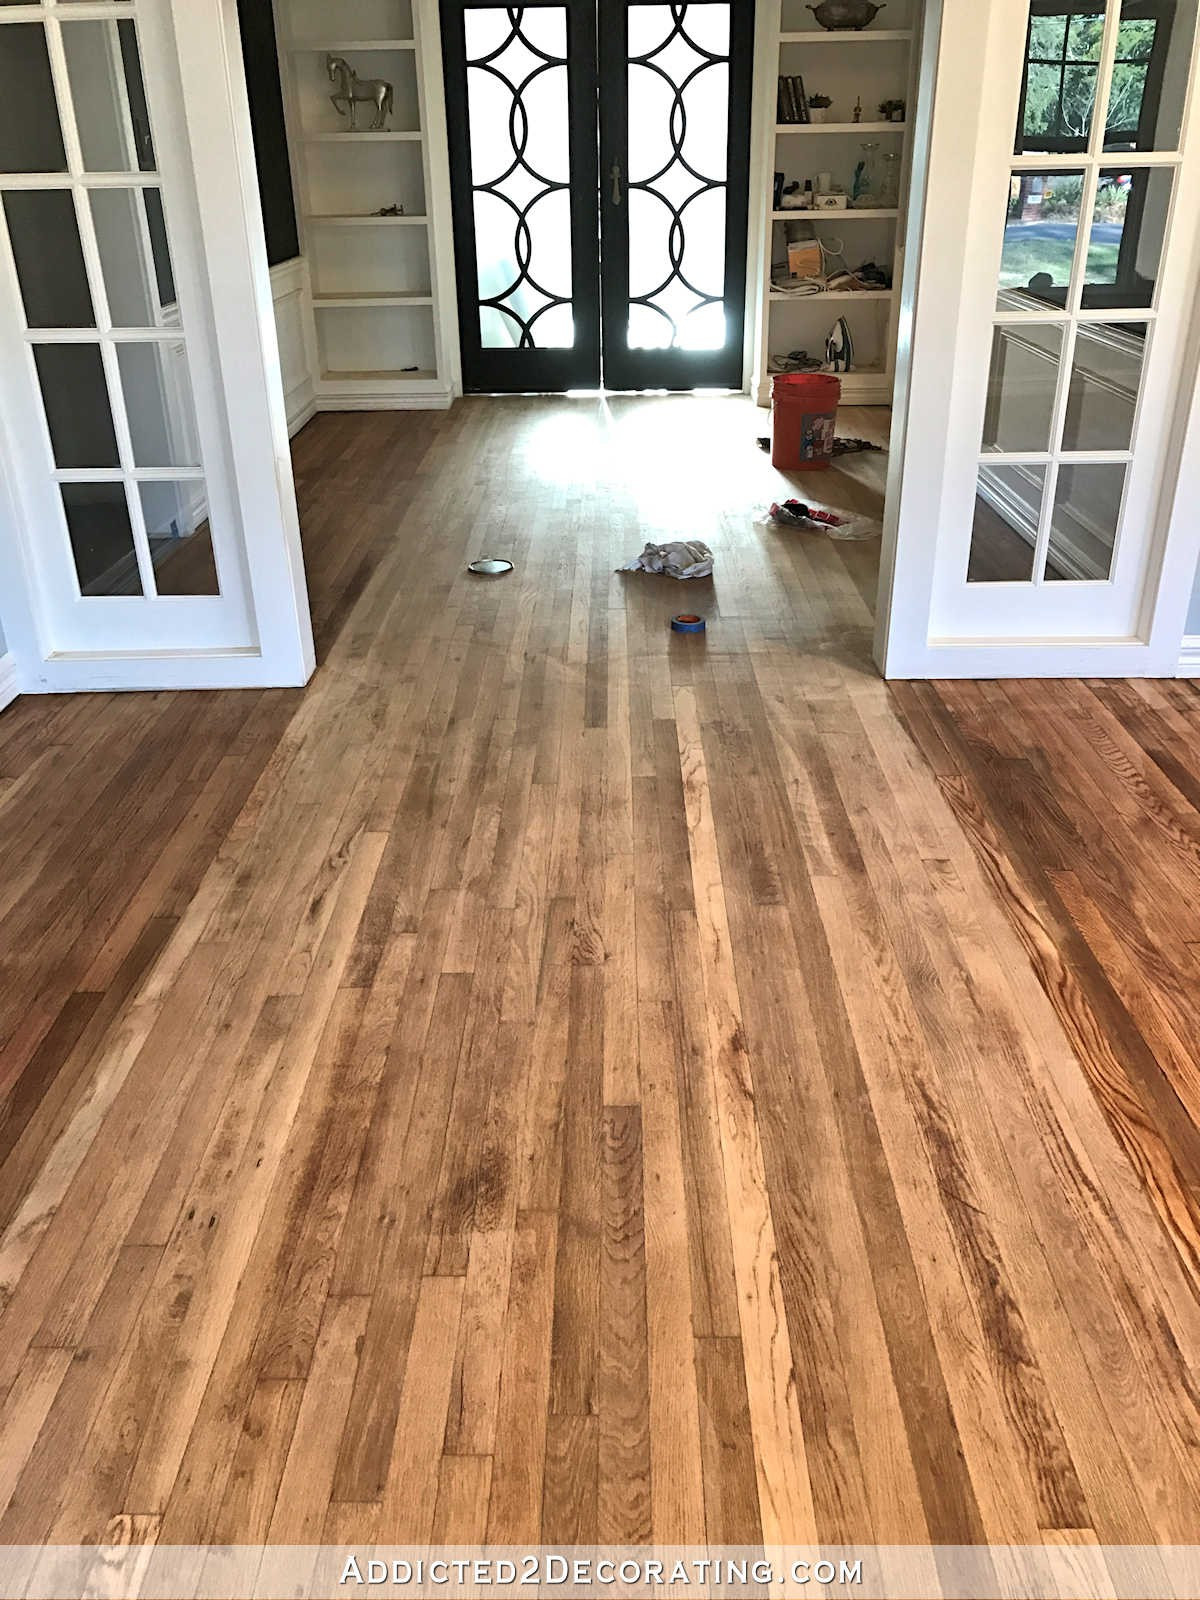 15 Great Hardwood Floor Sanding and Refinishing Near Me 2024 free download hardwood floor sanding and refinishing near me of 19 unique how much does it cost to refinish hardwood floors gallery regarding how much does it cost to refinish hardwood floors unique adven